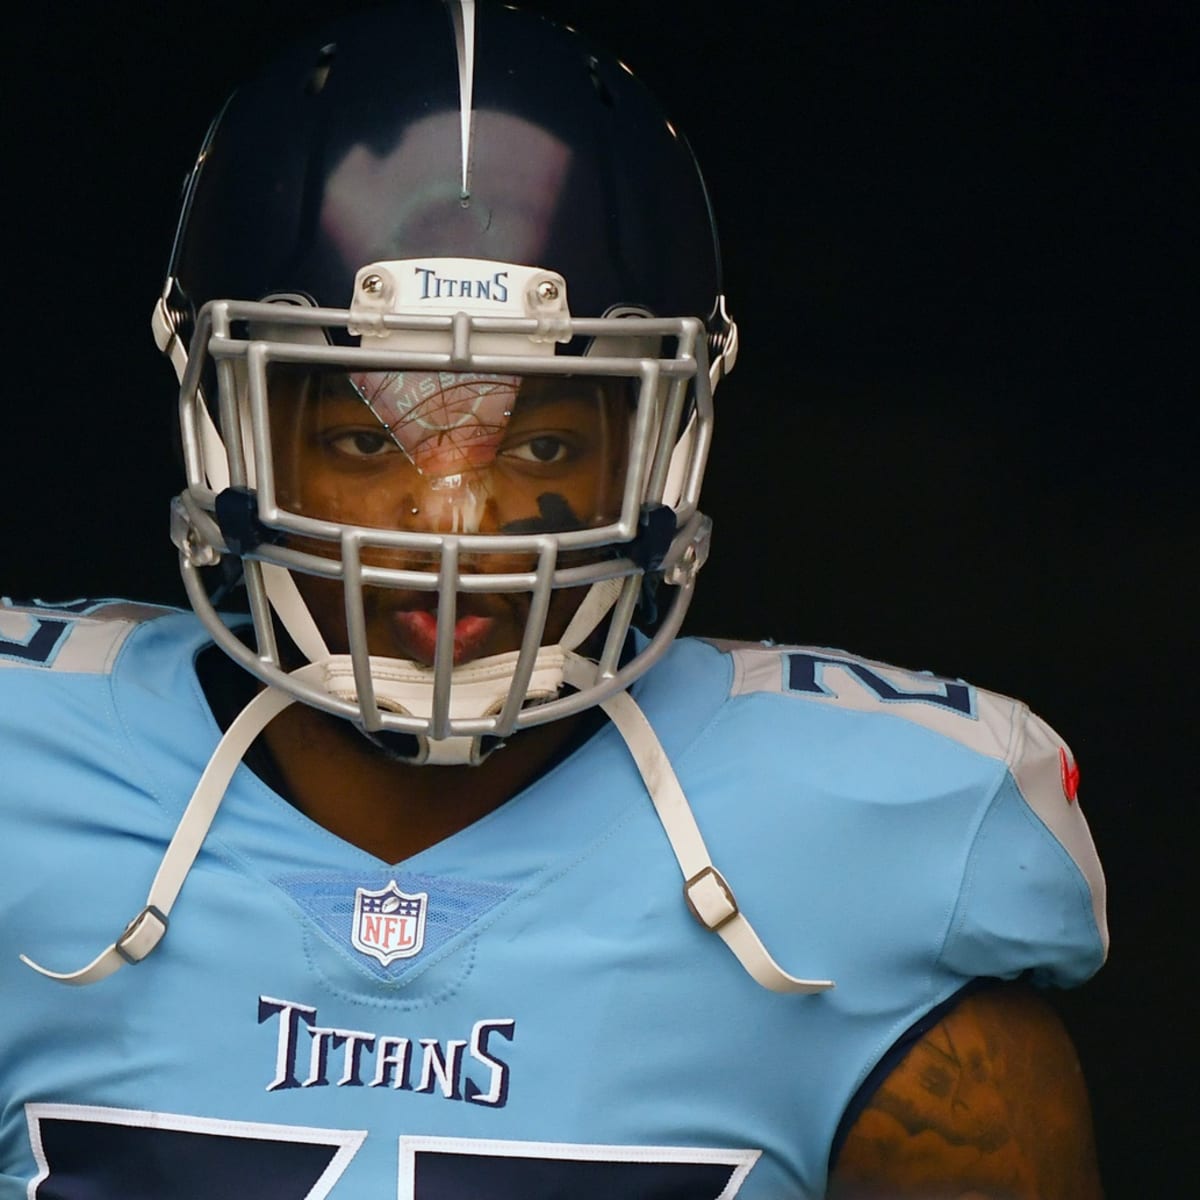 Ex-Alabama back Derrick Henry ready to start with Titans - Sports  Illustrated